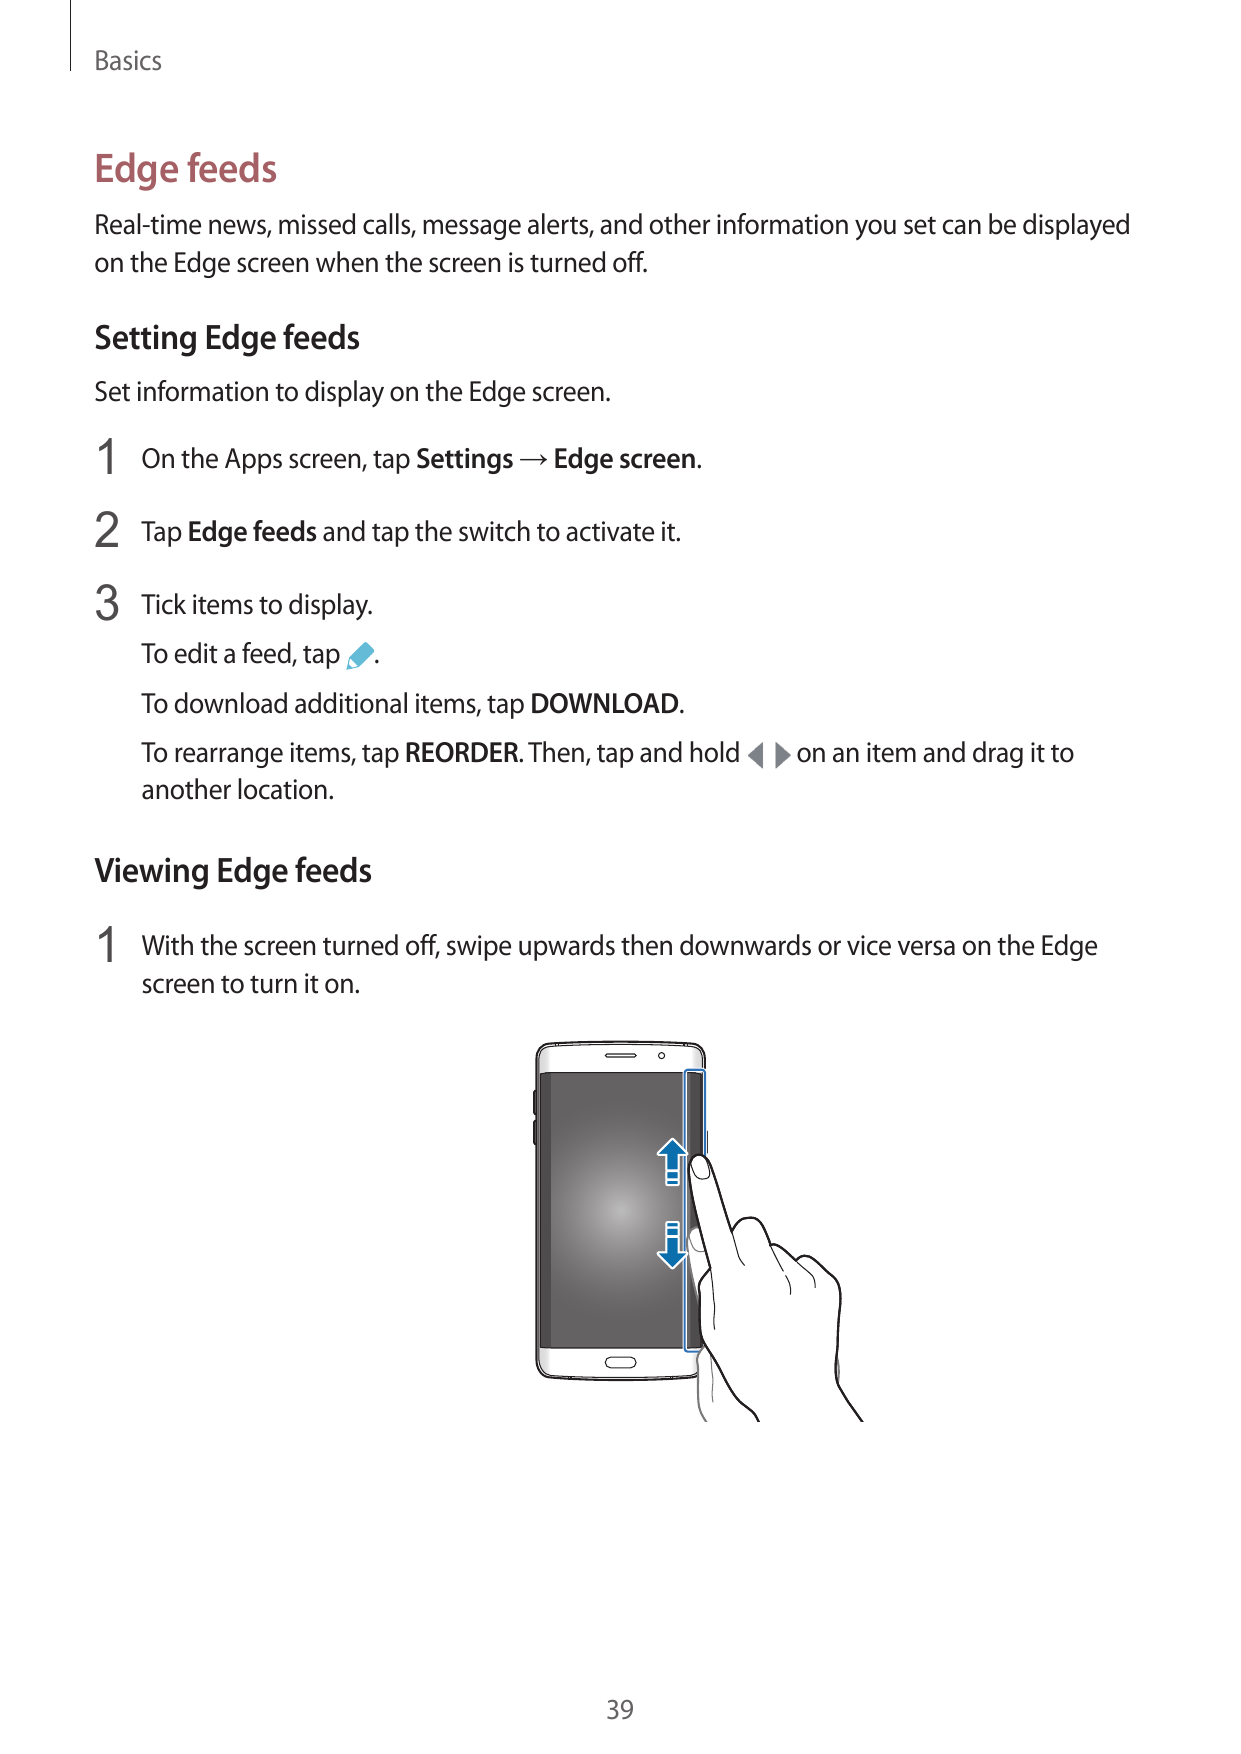 BasicsEdge feedsReal-time news, missed calls, message alerts, and other information you set can be displayedon the Edge screen w